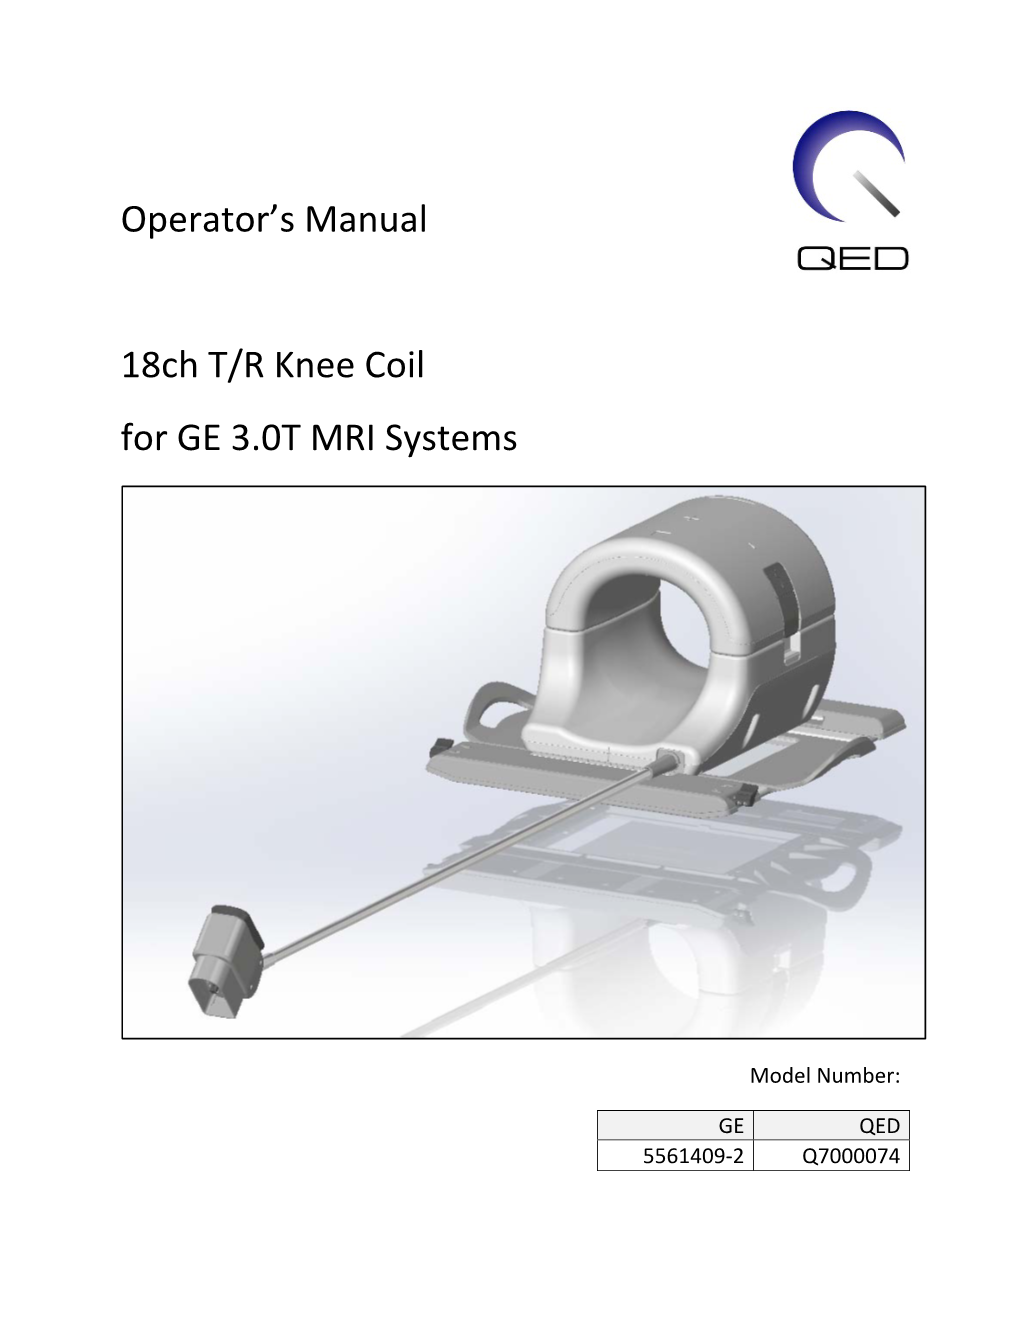 Operator's Manual 18Ch T/R Knee Coil for GE 3.0T MRI Systems